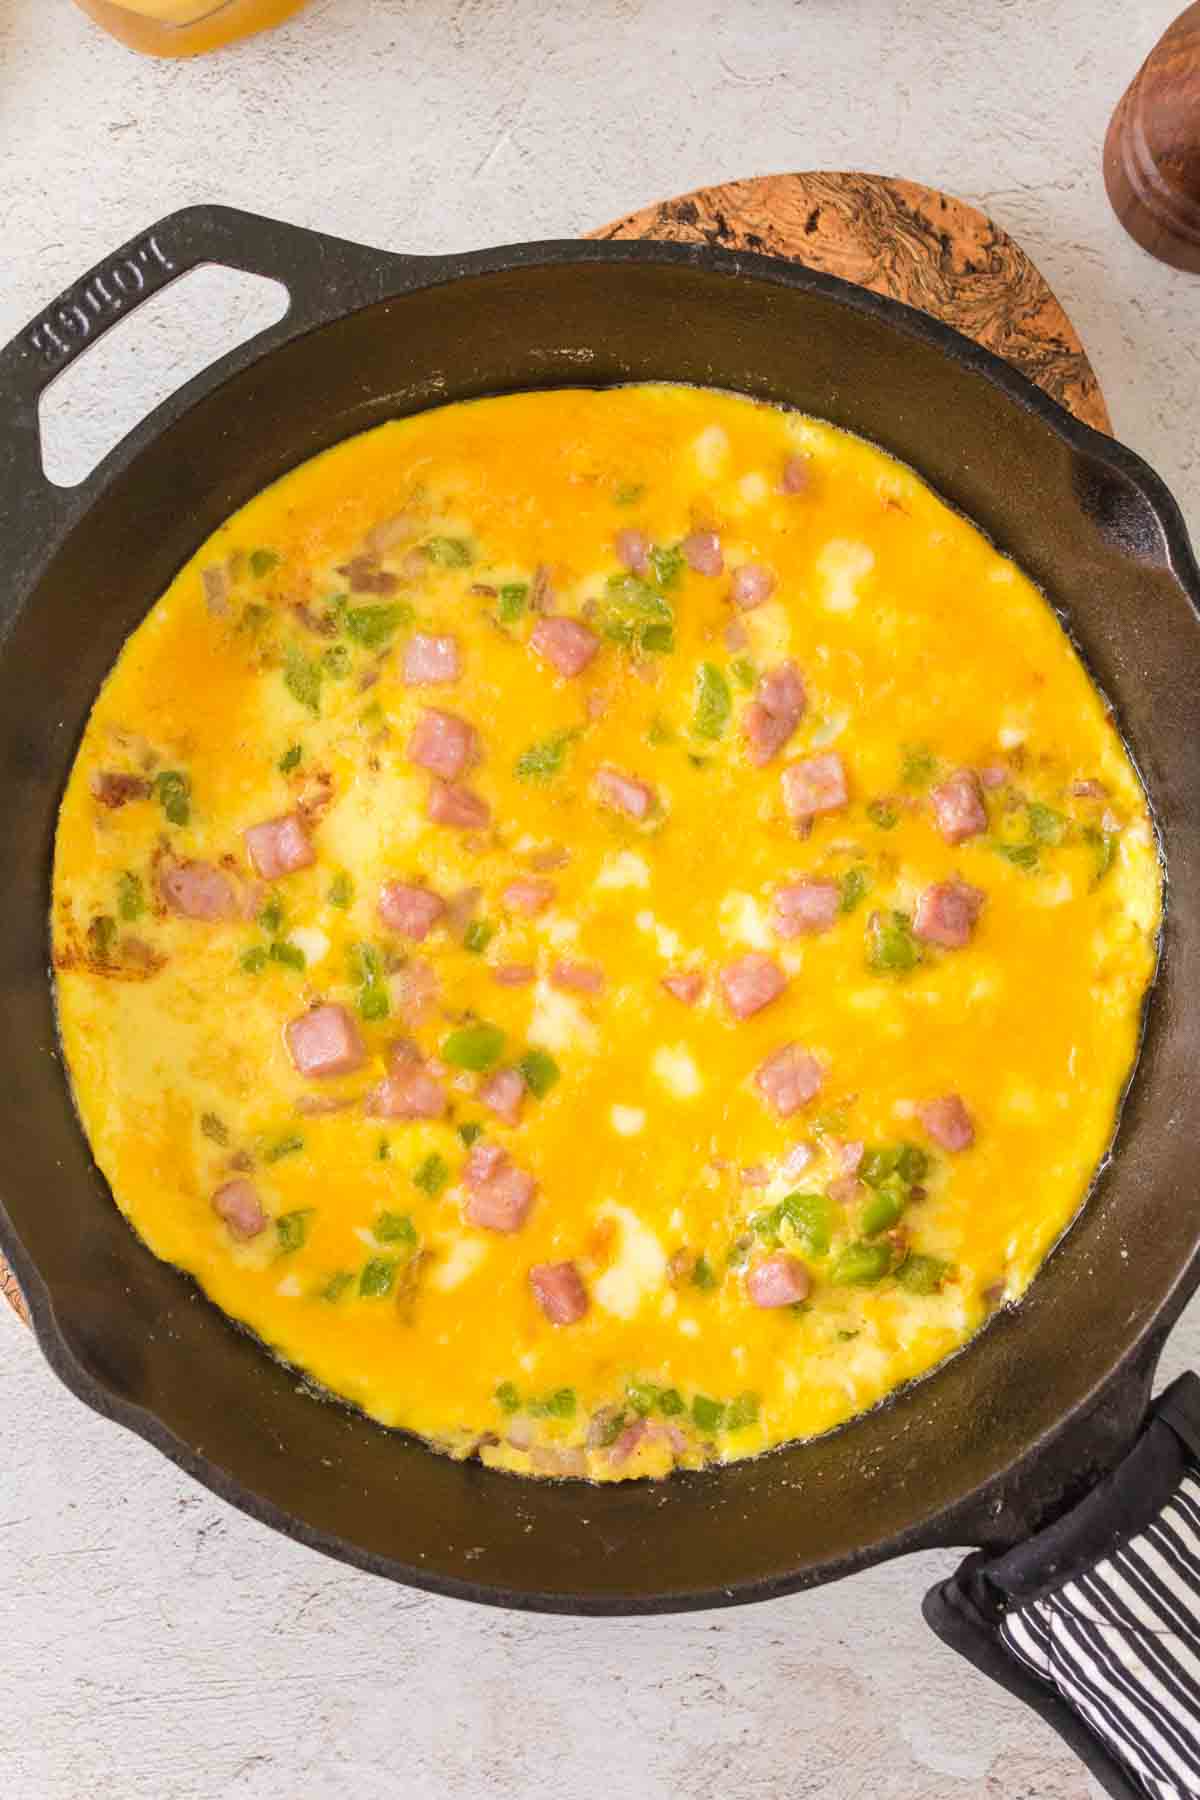 omelet being cooked in the cast iron pan.